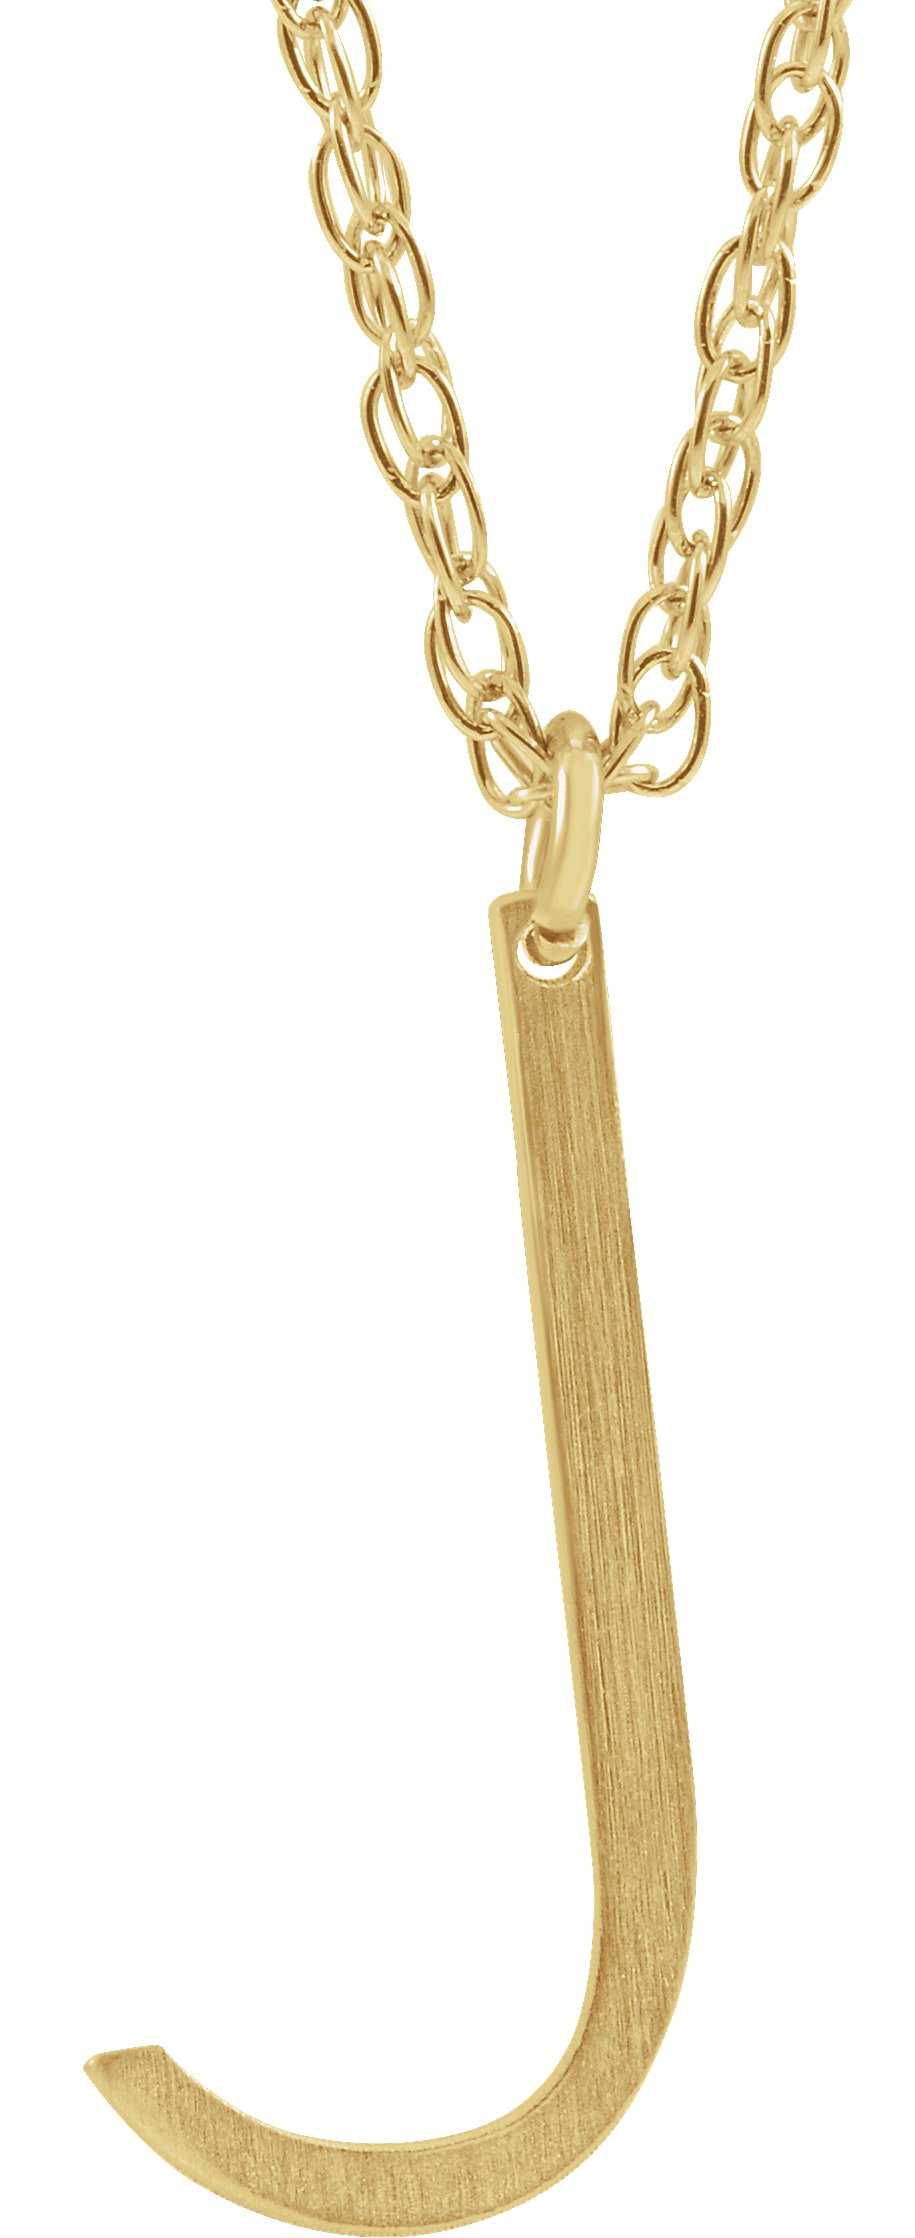 14K Yellow Gold-Plated Sterling Silver Block Initial J 16-18" Necklace with Brush Finish